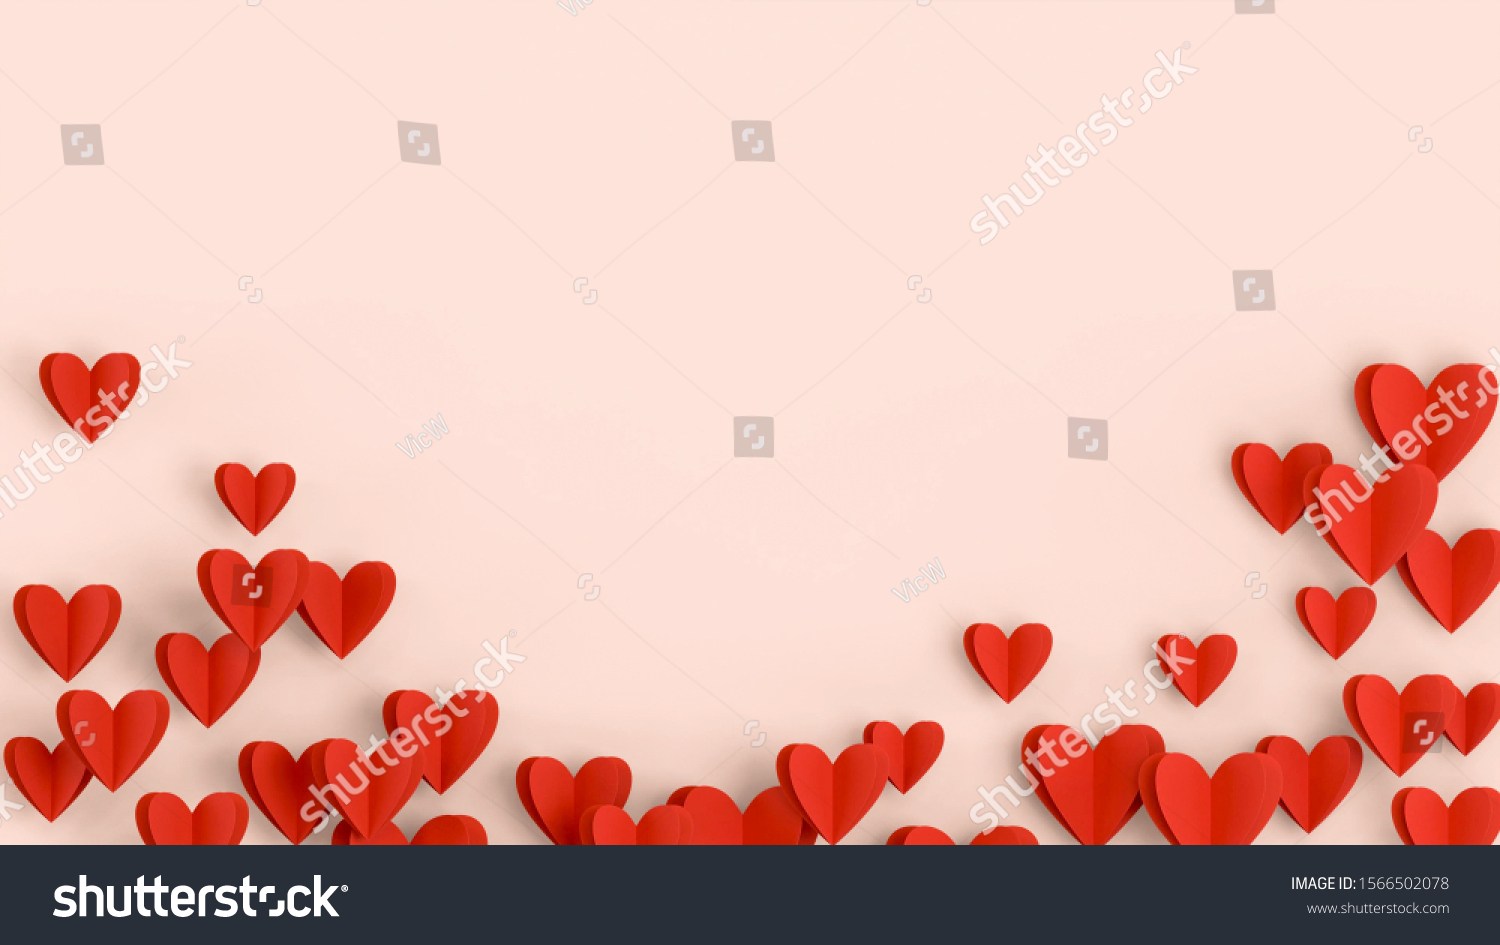 Red hearts background, paper cut romantic concept, top view. Beautiful cute hearts on pastel pink table flat lay composition. Valentines Day greeting card concept. Mothers Day anniversary design. #1566502078